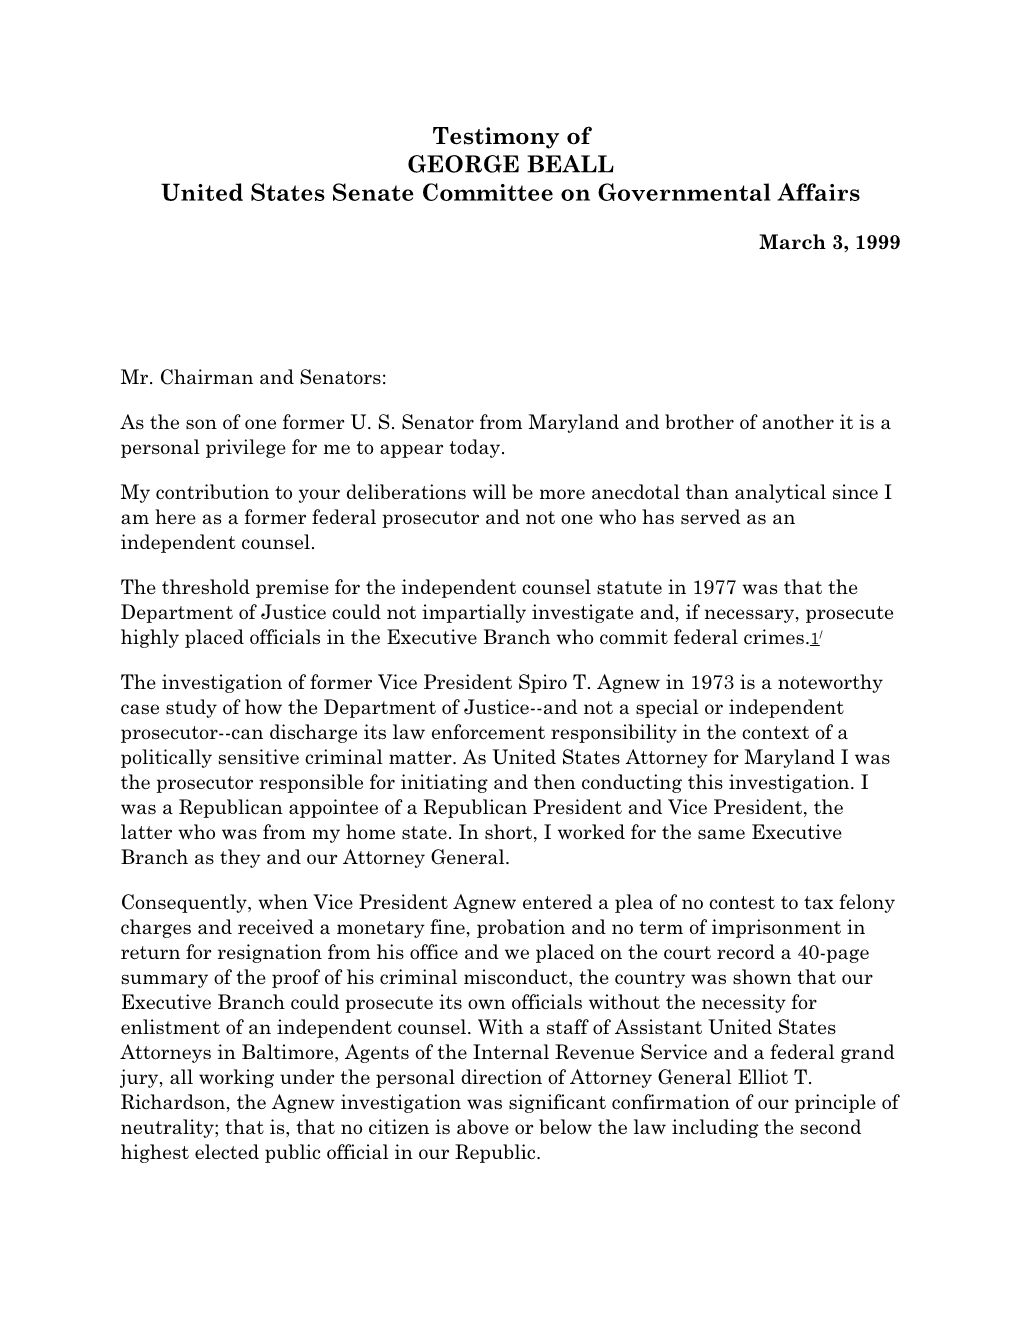 Testimony of GEORGE BEALL United States Senate Committee on Governmental Affairs